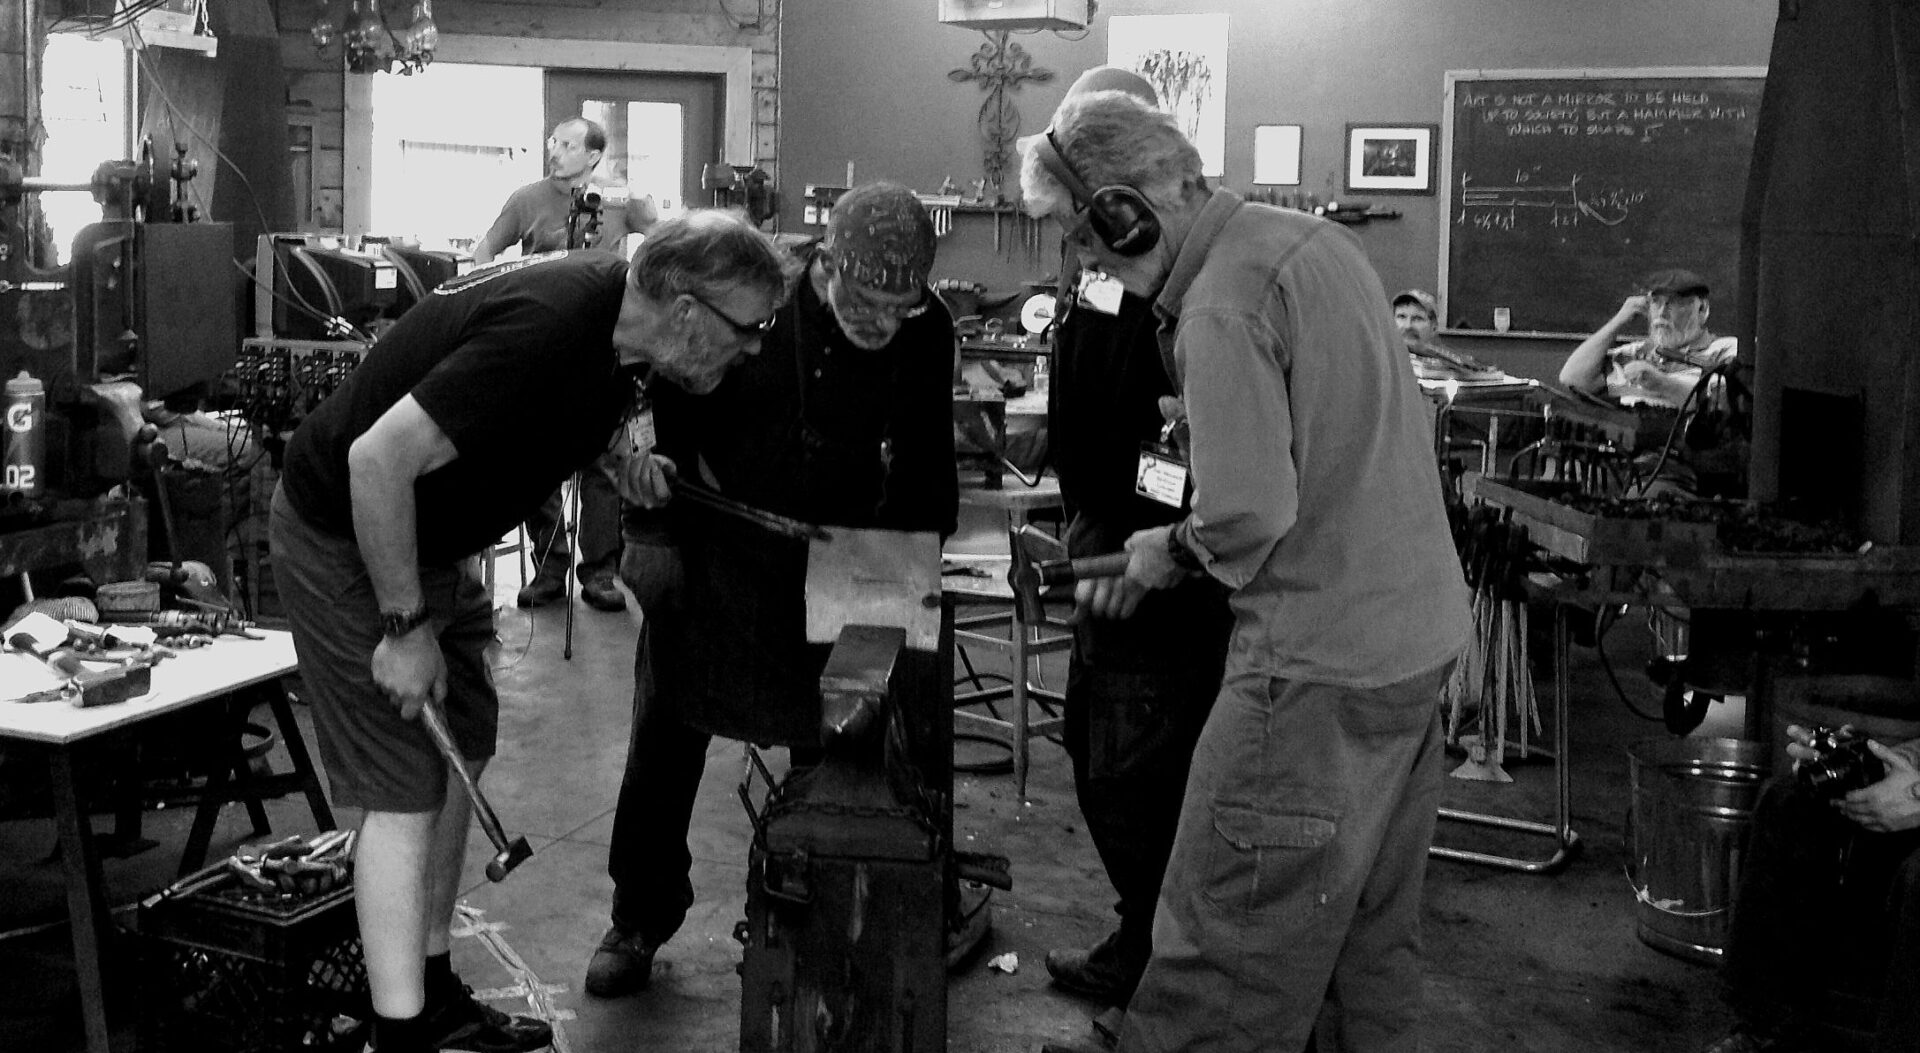 A black and white photo featuring a group of people working in a traditional blacksmith shop.